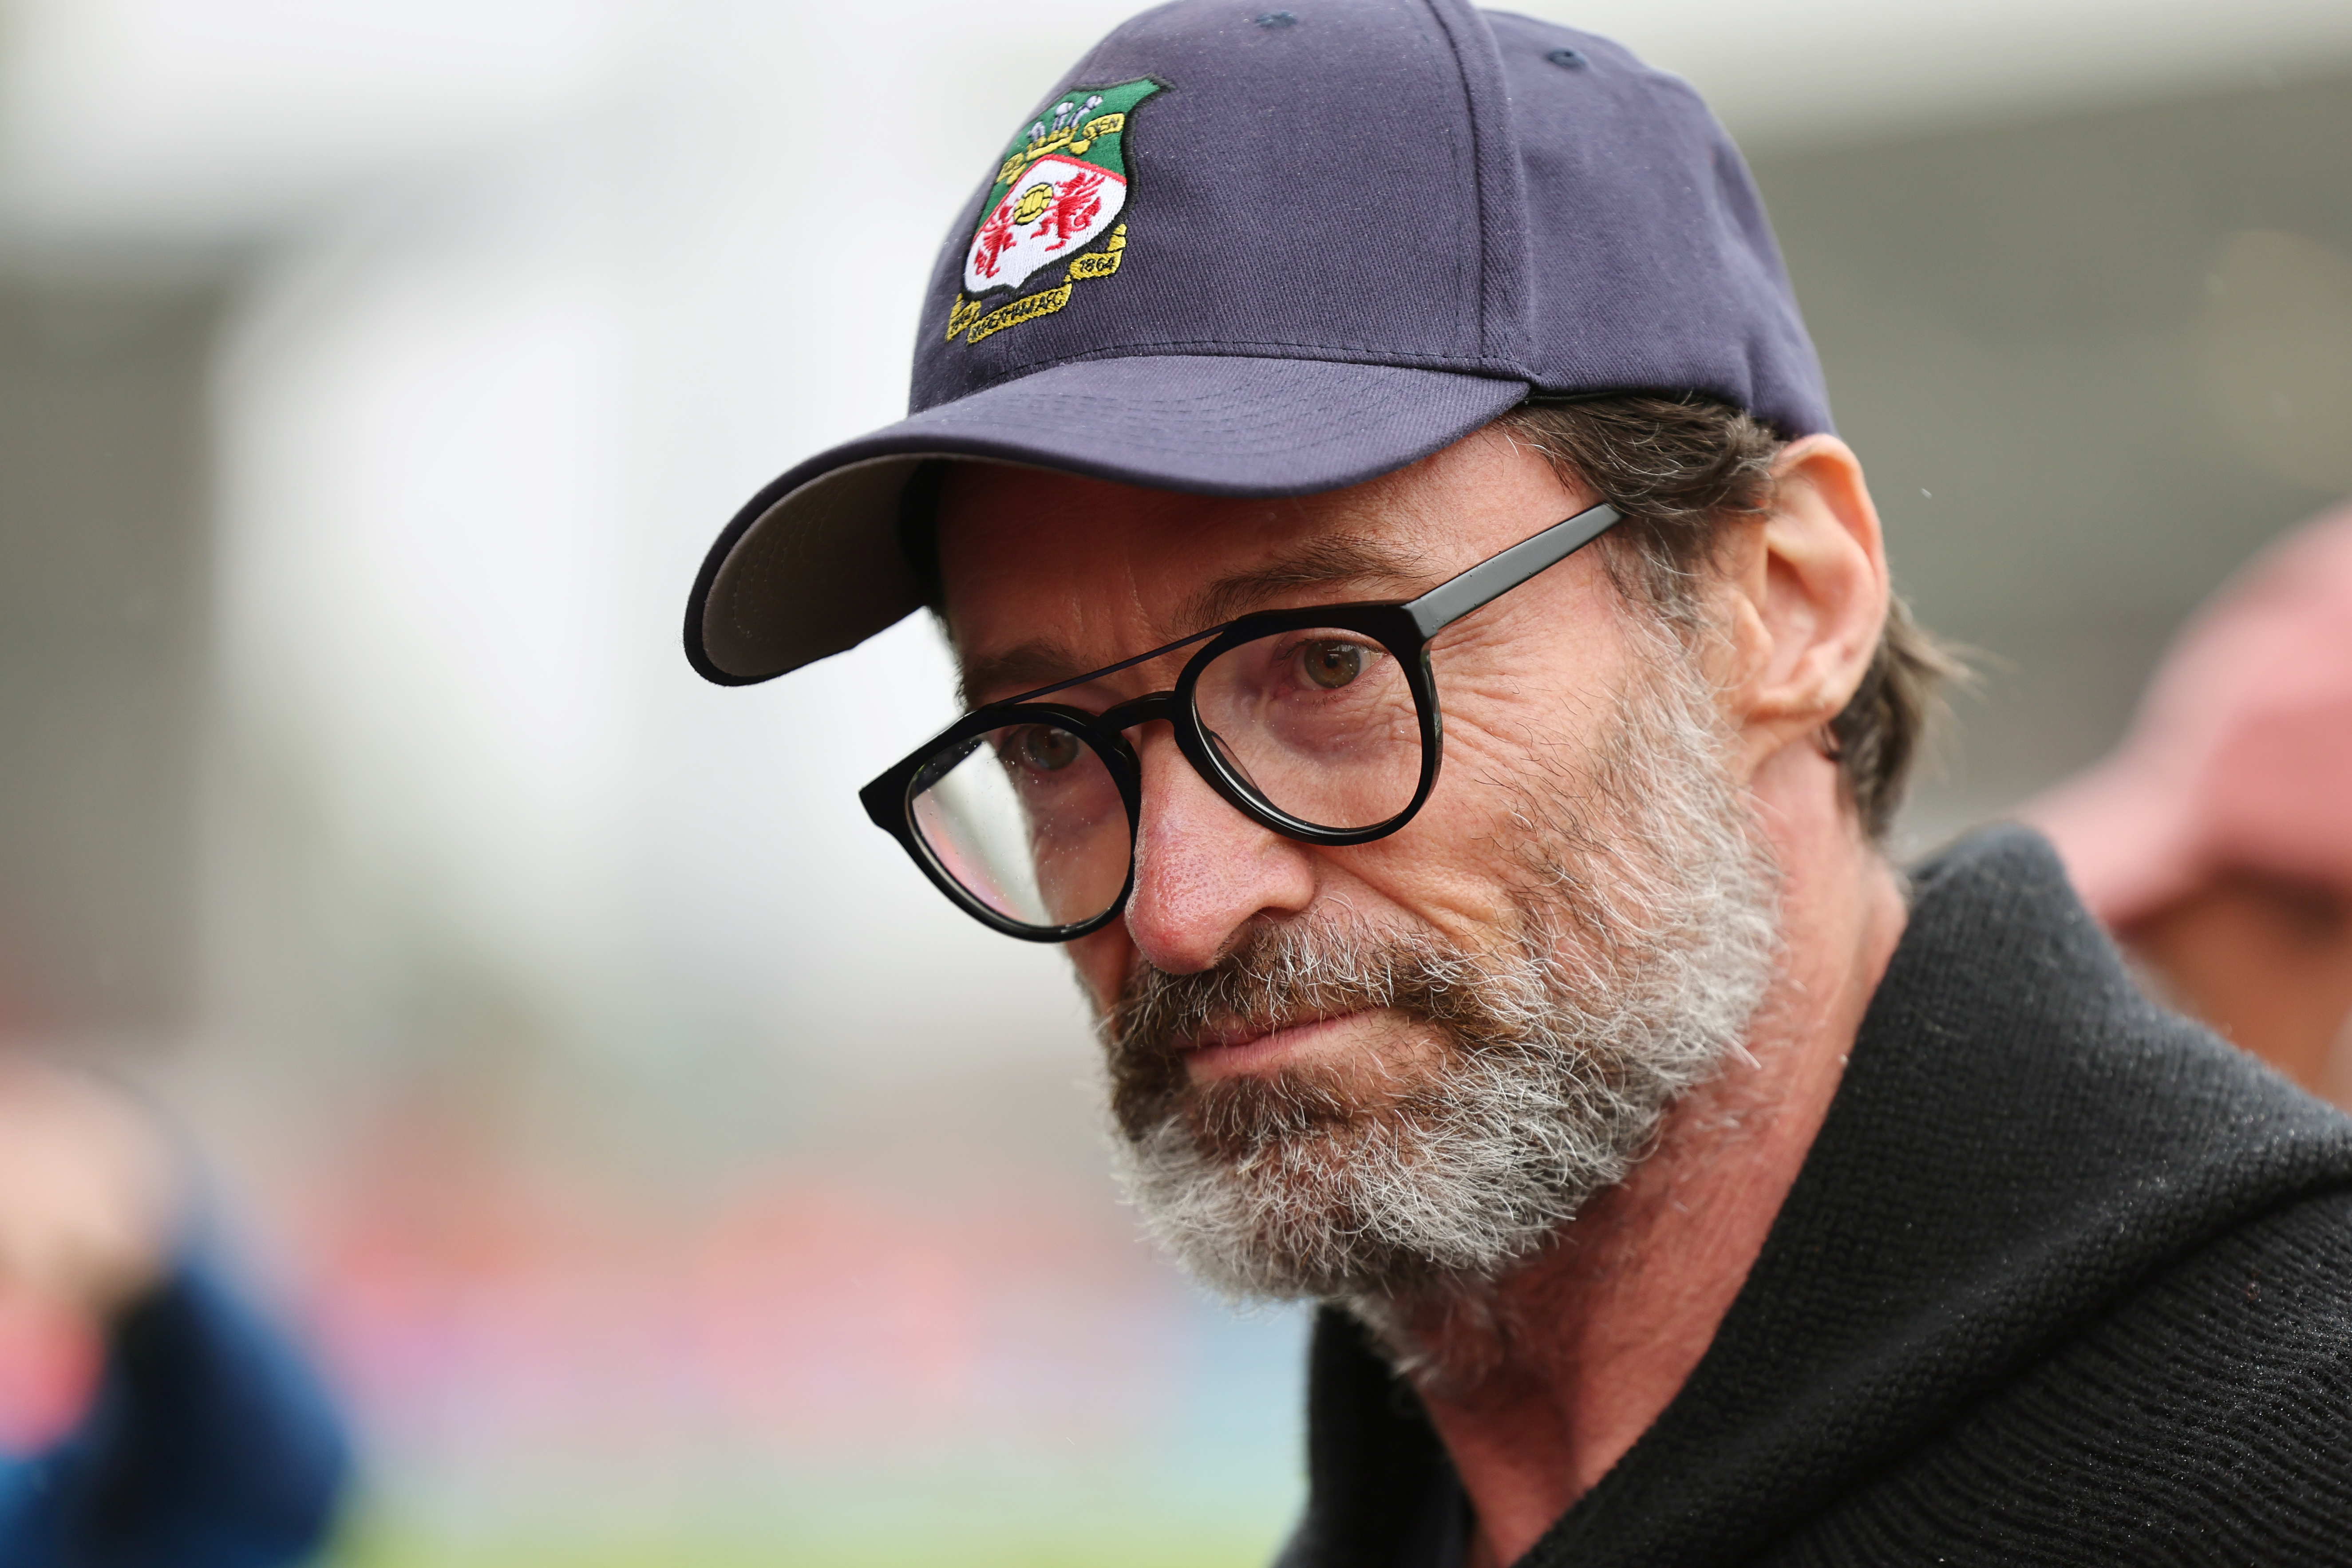 Hugh Jackman at the Sky Bet League Two match in Wrexham, Wales on August 5, 2023 | Source: Getty Images